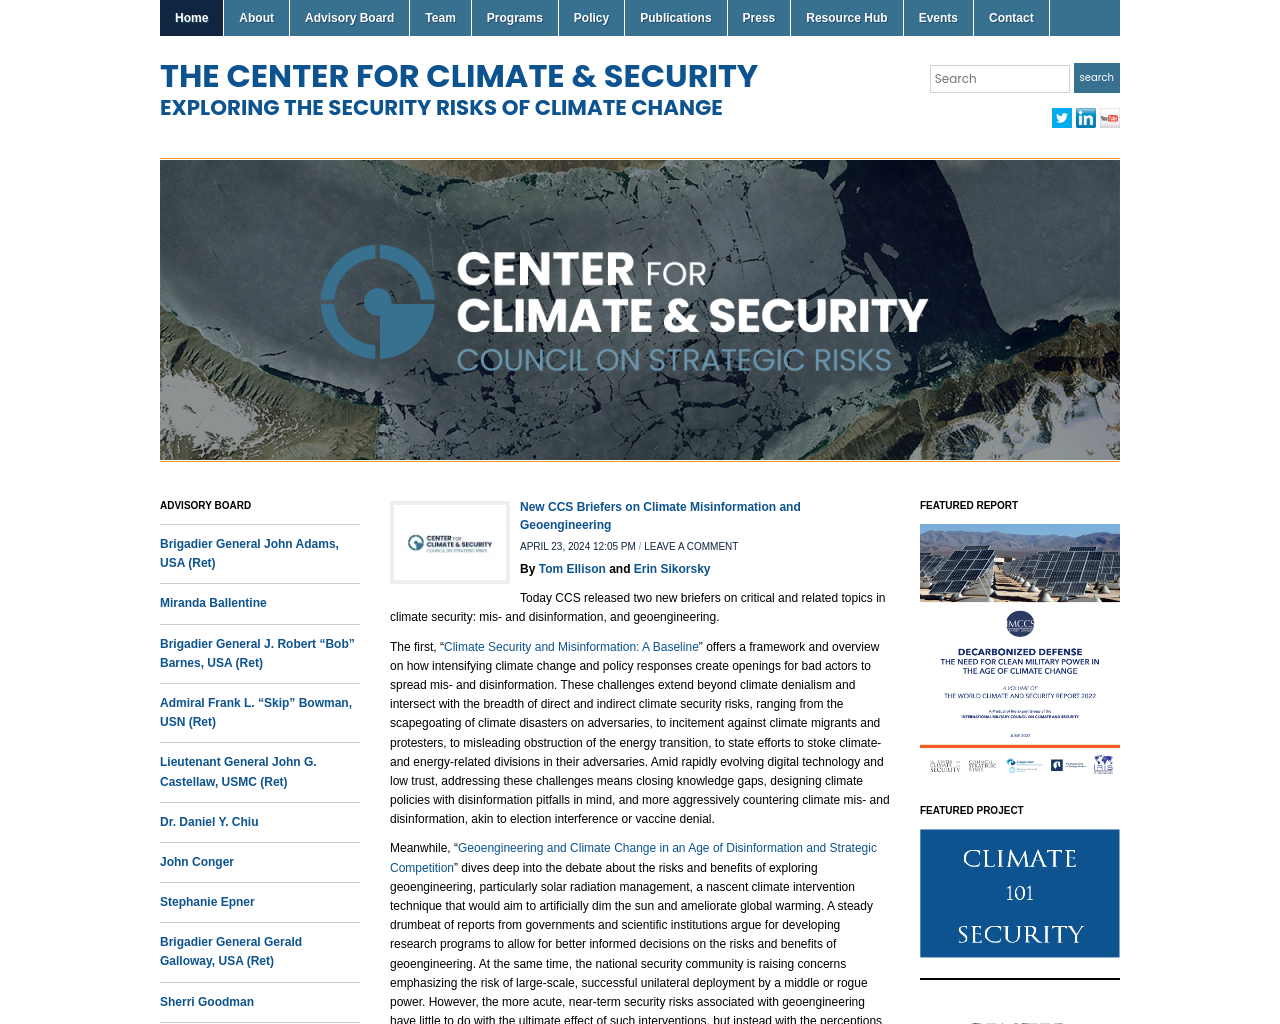 climateandsecurity.org